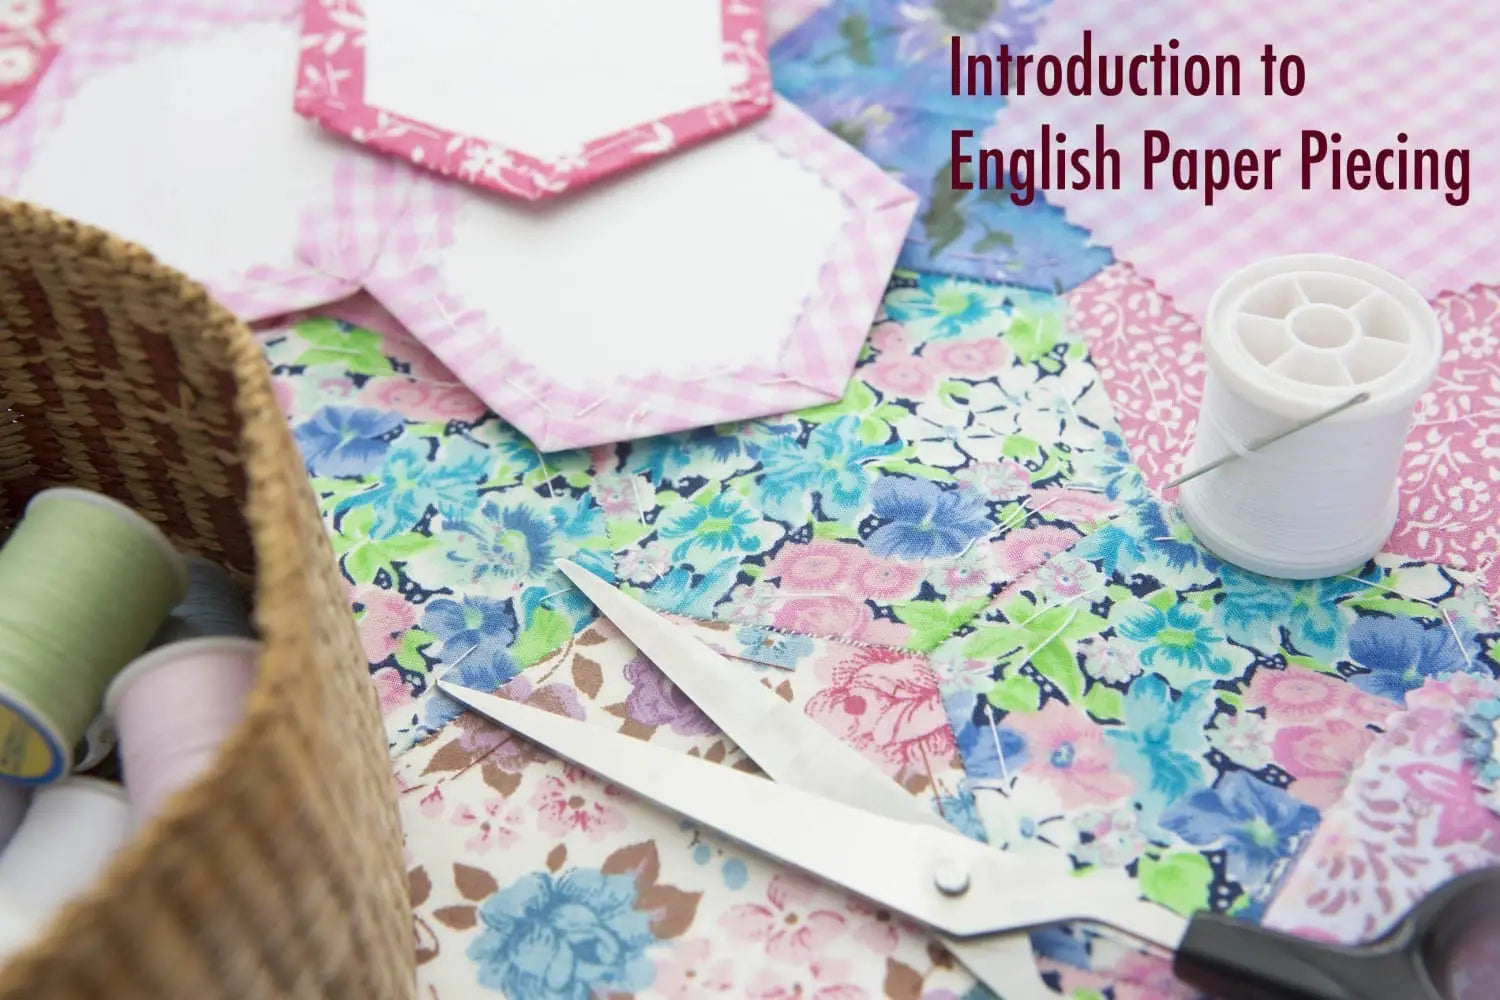 Our Beginners Guide to English Paper Piecing by Cathy Perlmutter